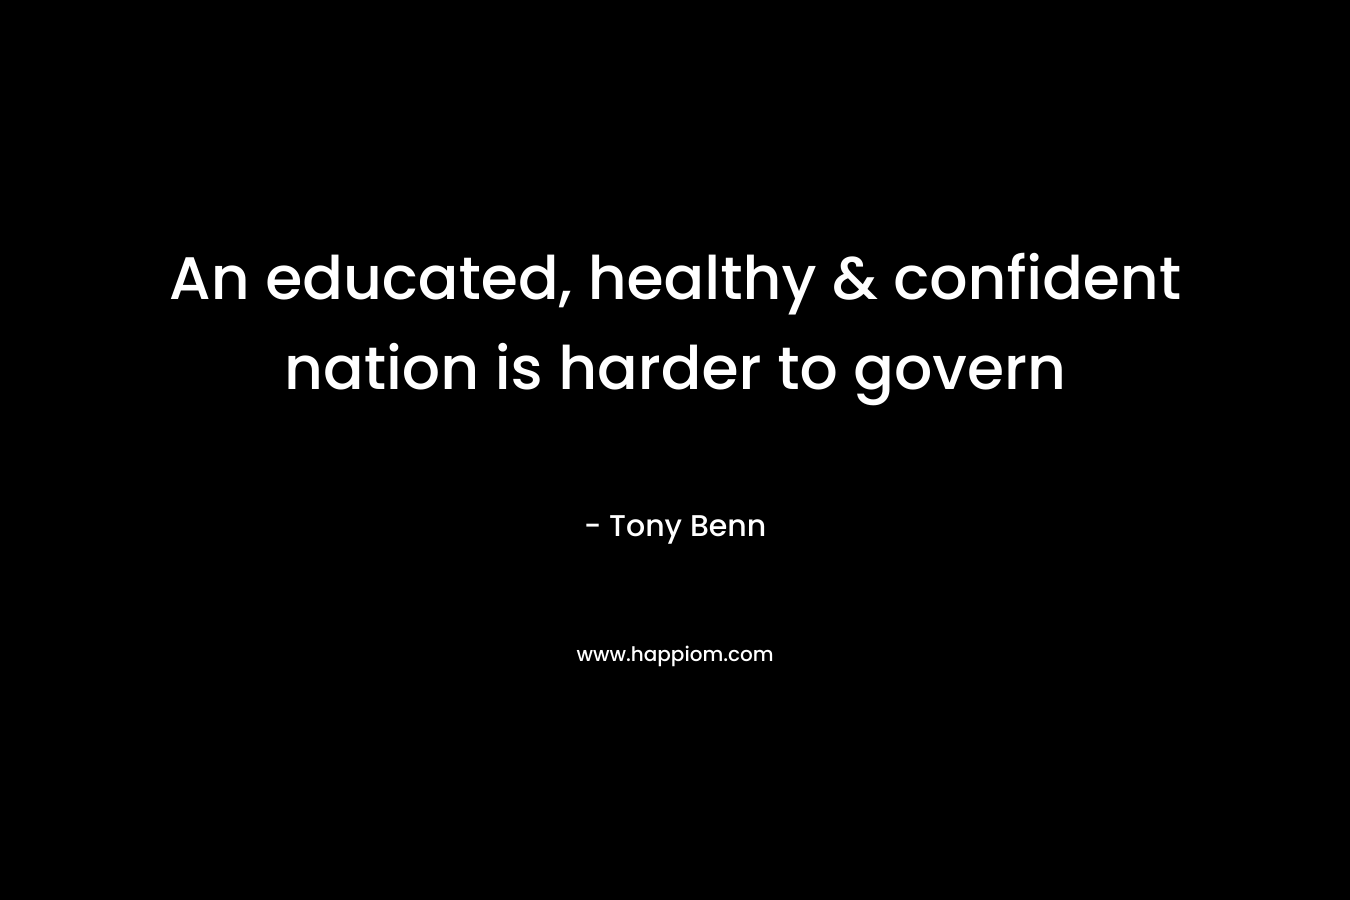 An educated, healthy & confident nation is harder to govern